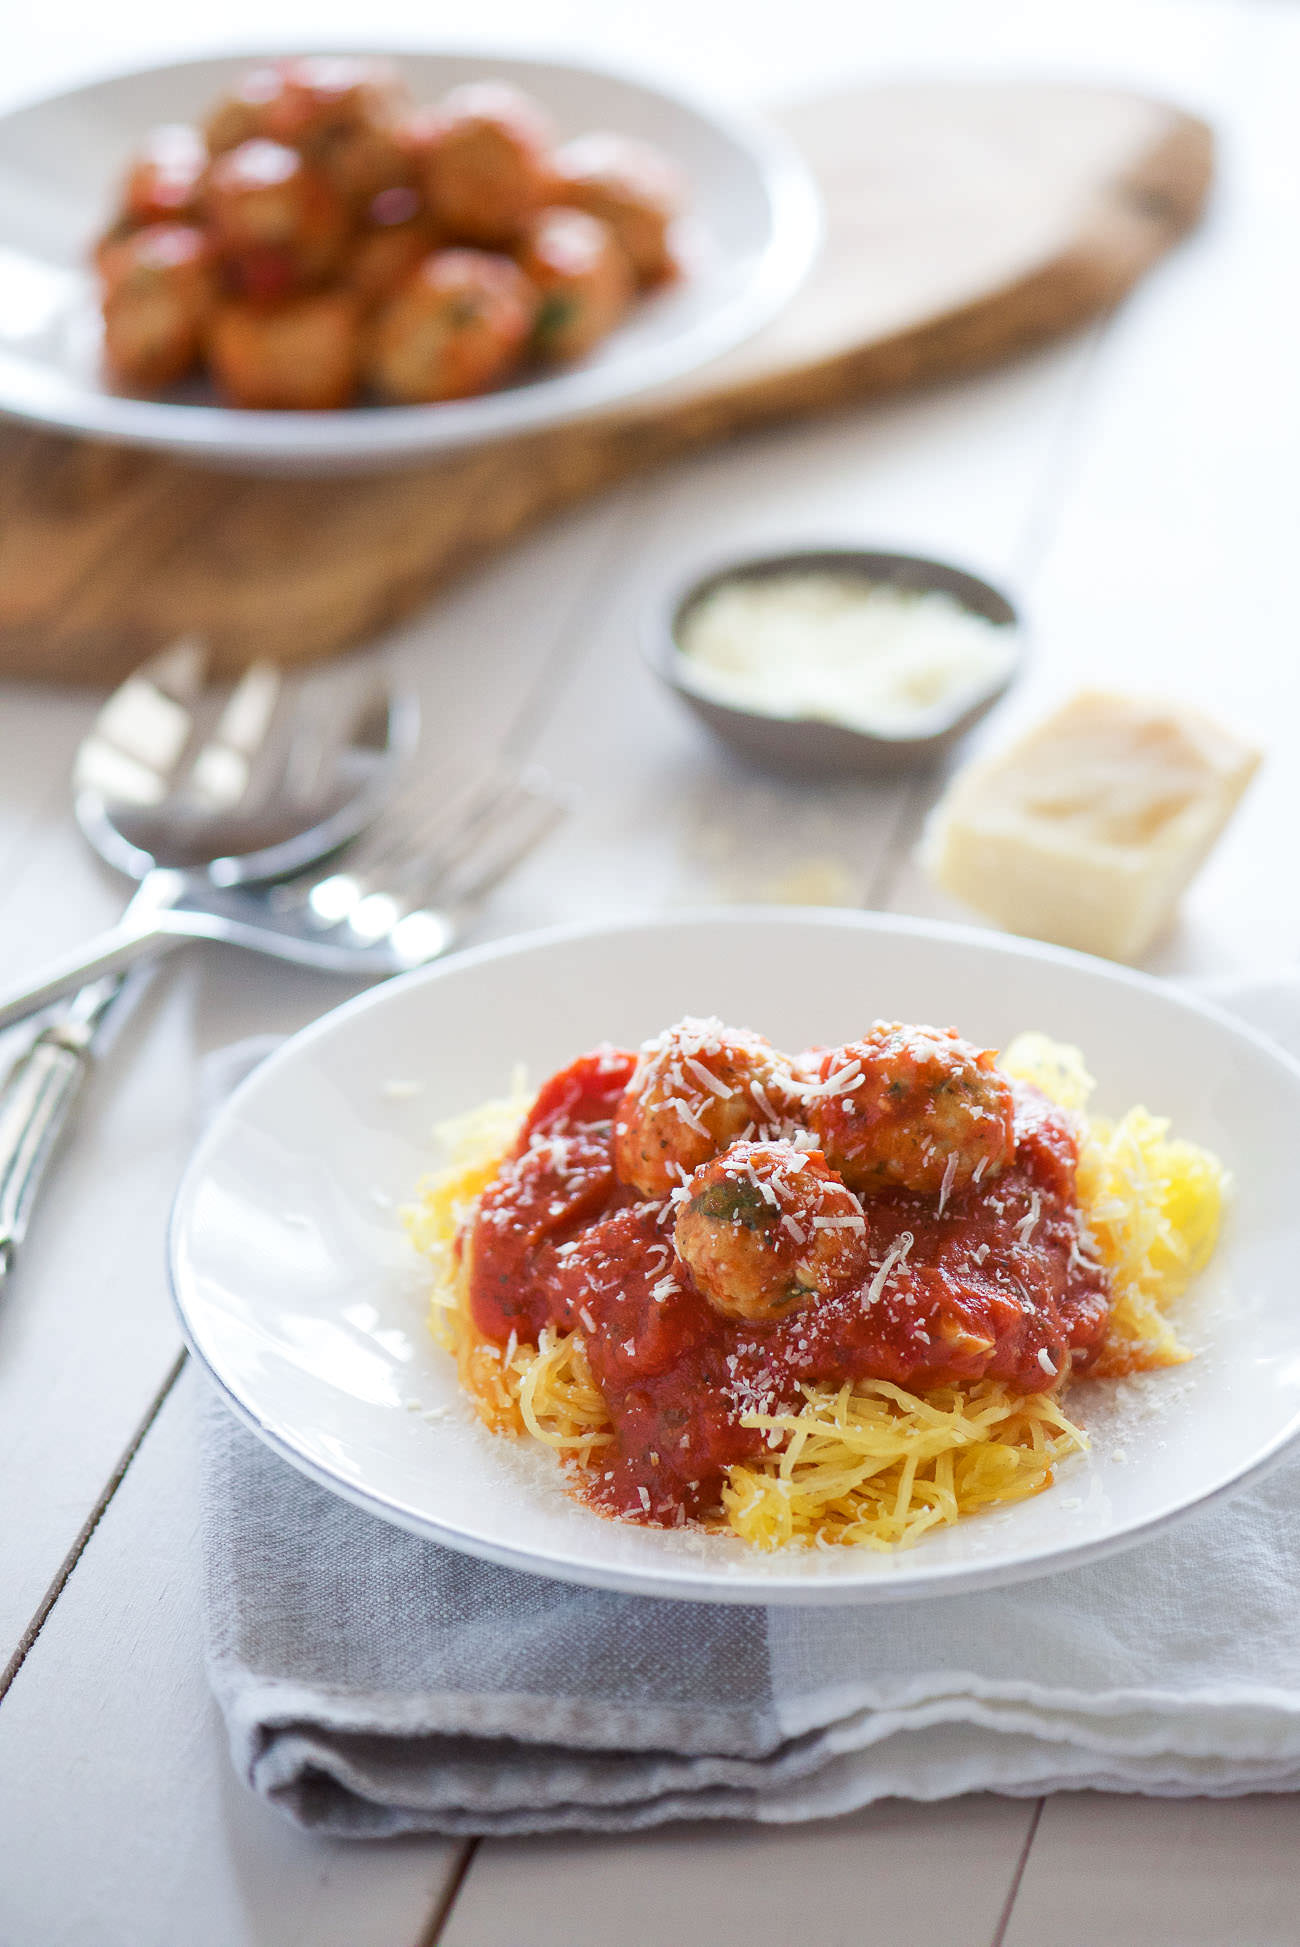 Skinny Sun Dried Tomato Meatballs with Spaghetti Squash are a light and flavorful way to cure your craving for spaghetti and meatballs! Lean ground turkey is mixed with sun dried tomatoes and spinach. Perfect to make ahead, freeze then bake before serving!